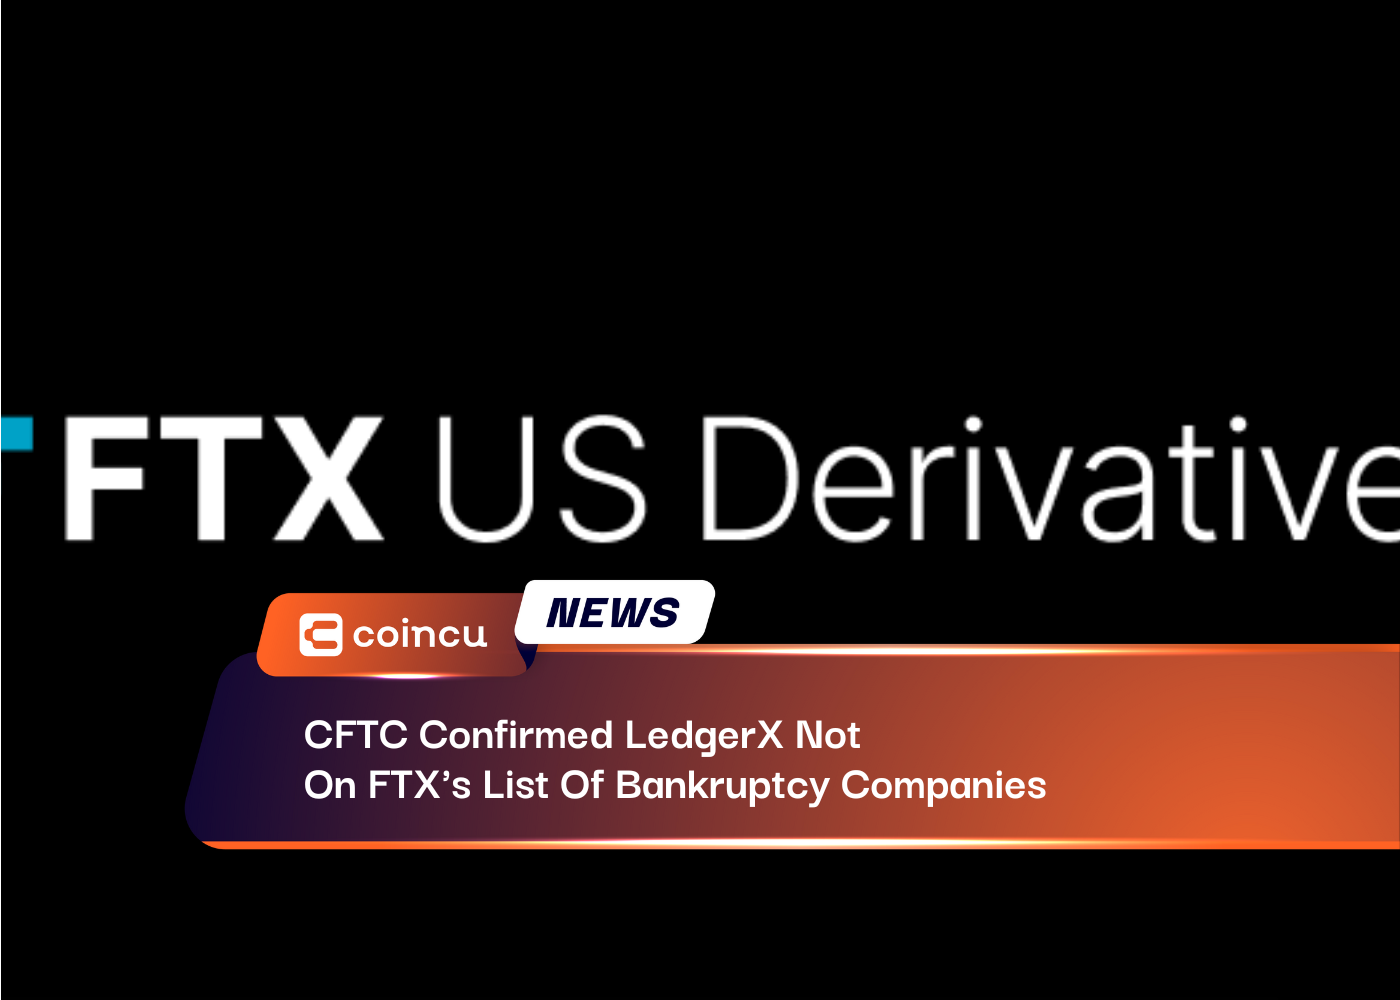 CFTC Confirmed LedgerX Not On FTX's List Of Bankruptcy Companies